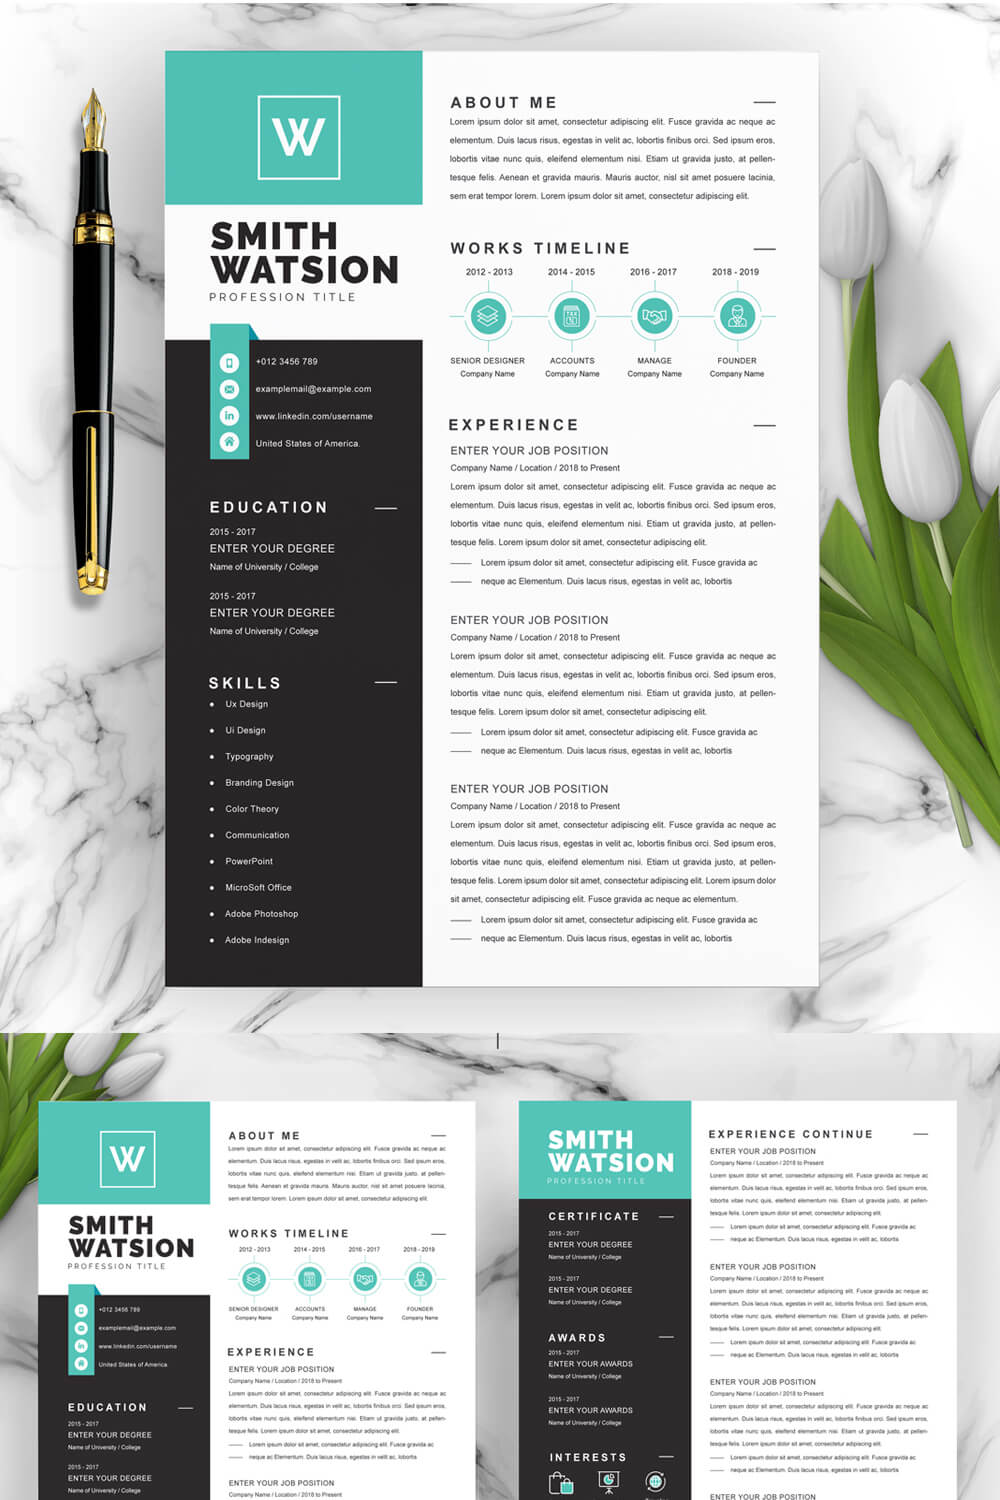 Sleek and Professional Resume Template for Career Advancement in Business, Finance, and Management Fields" pinterest preview image.